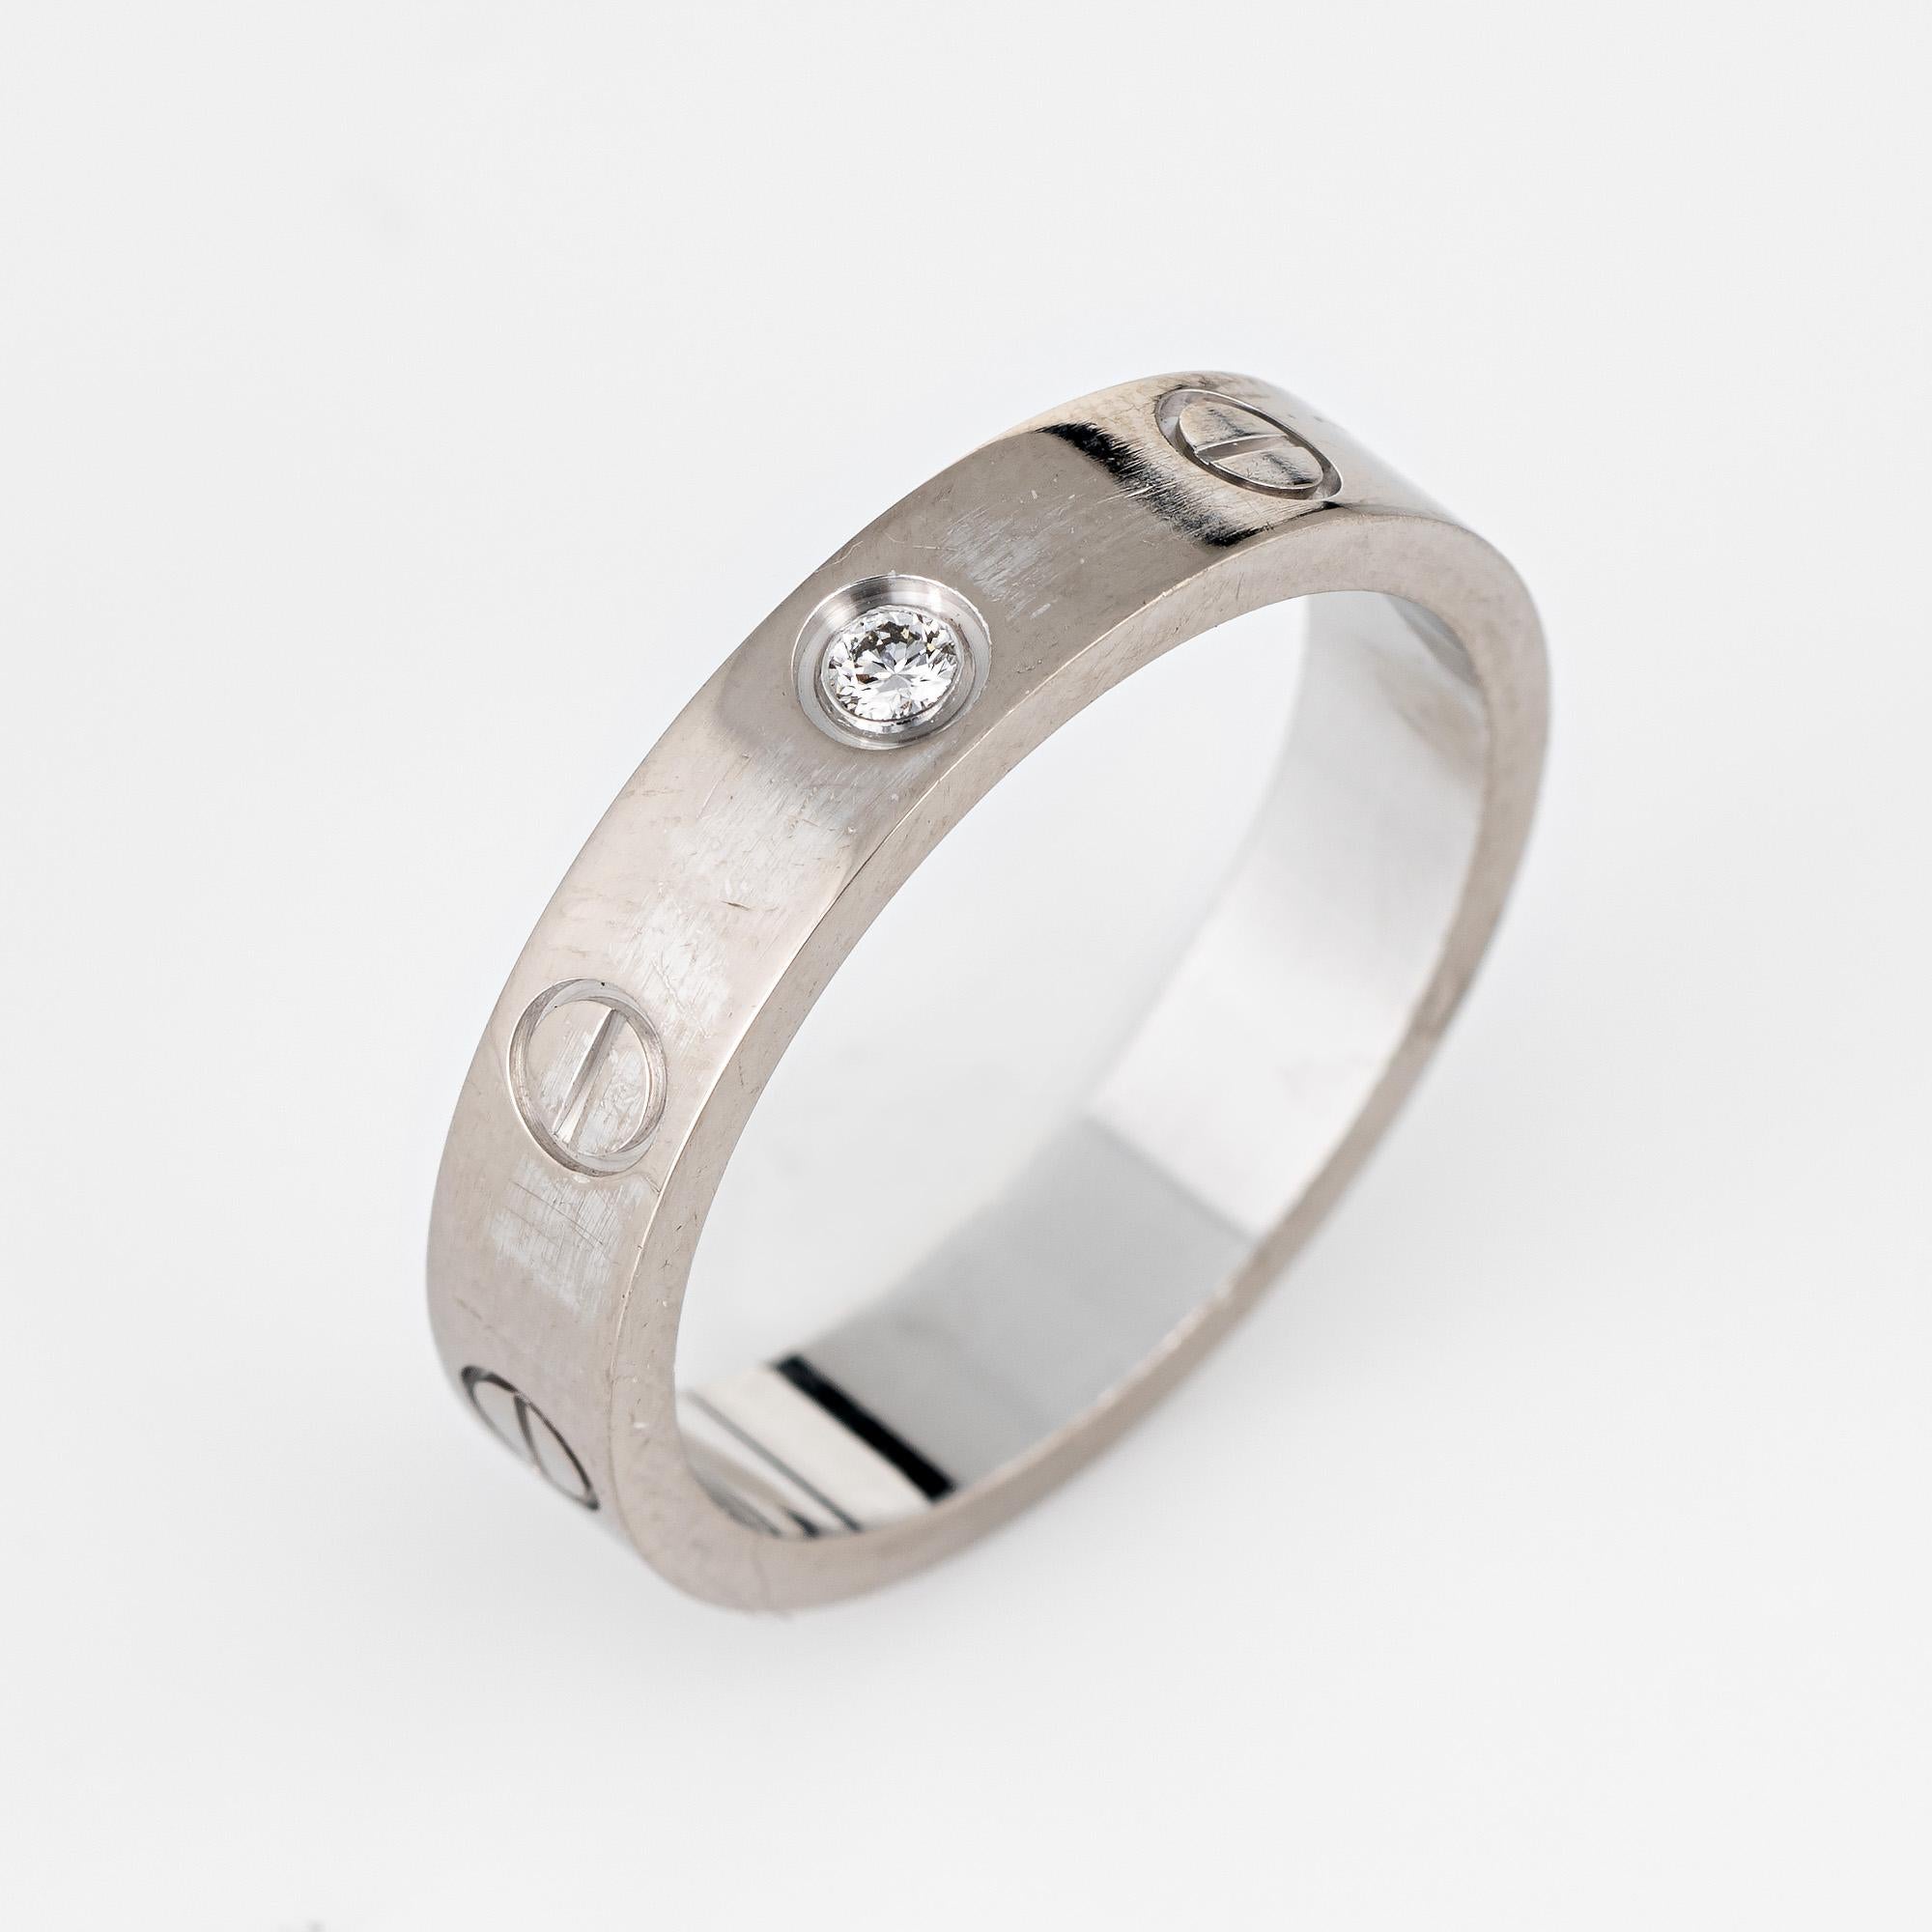 Cartier 1 diamond love wedding band crafted in 18 karat white gold.  

One 0.02 carat diamond is set into the band (estimated at F-G color and VVS2 clarity).

The ring currently retails for $2,160 (plus taxes).

The ring is in excellent condition